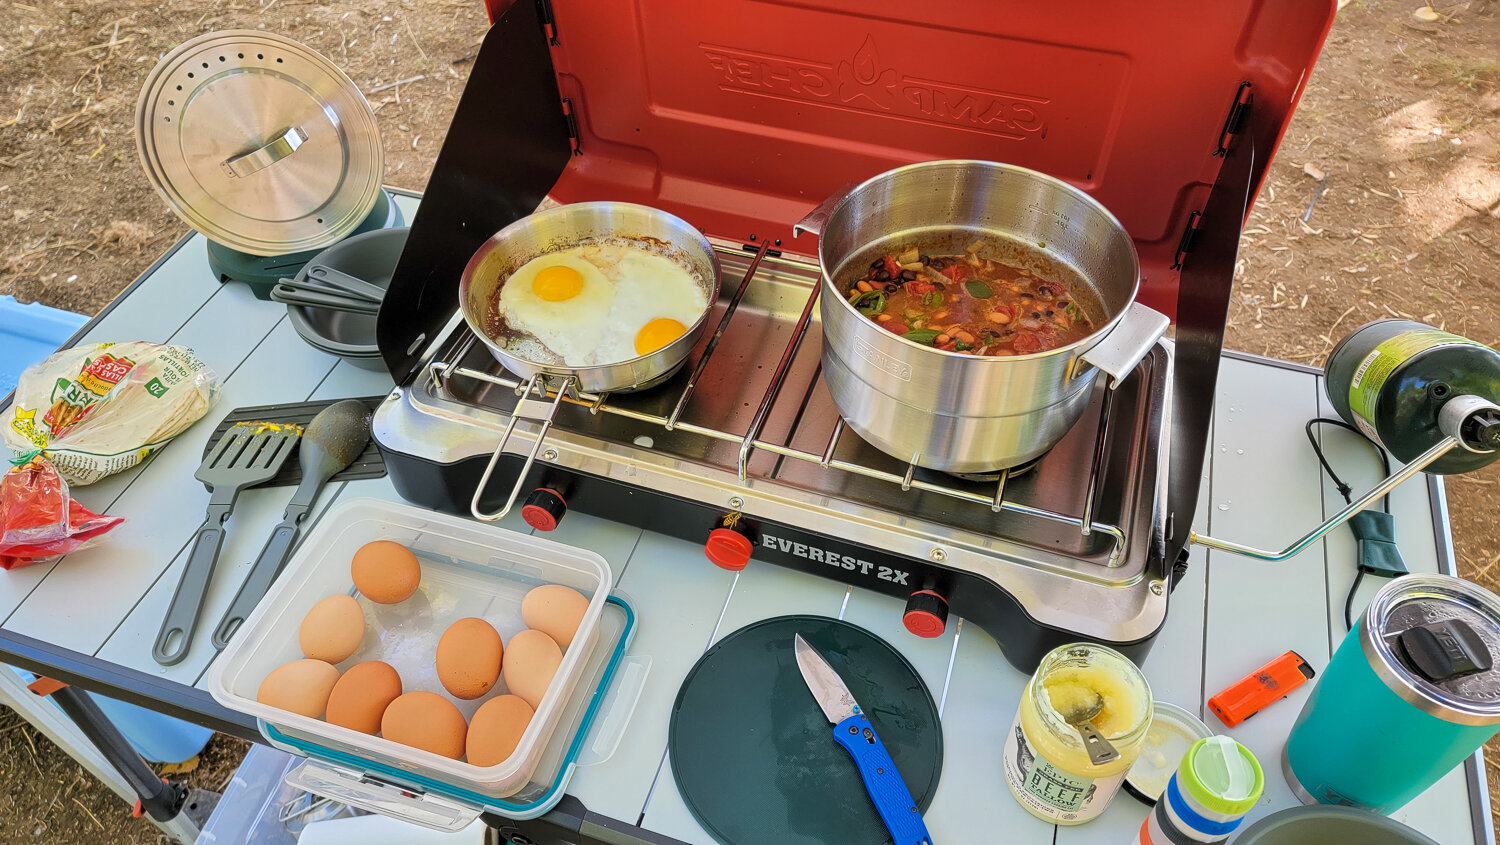 Top-down view of beans and eggs cooking on a camp stove